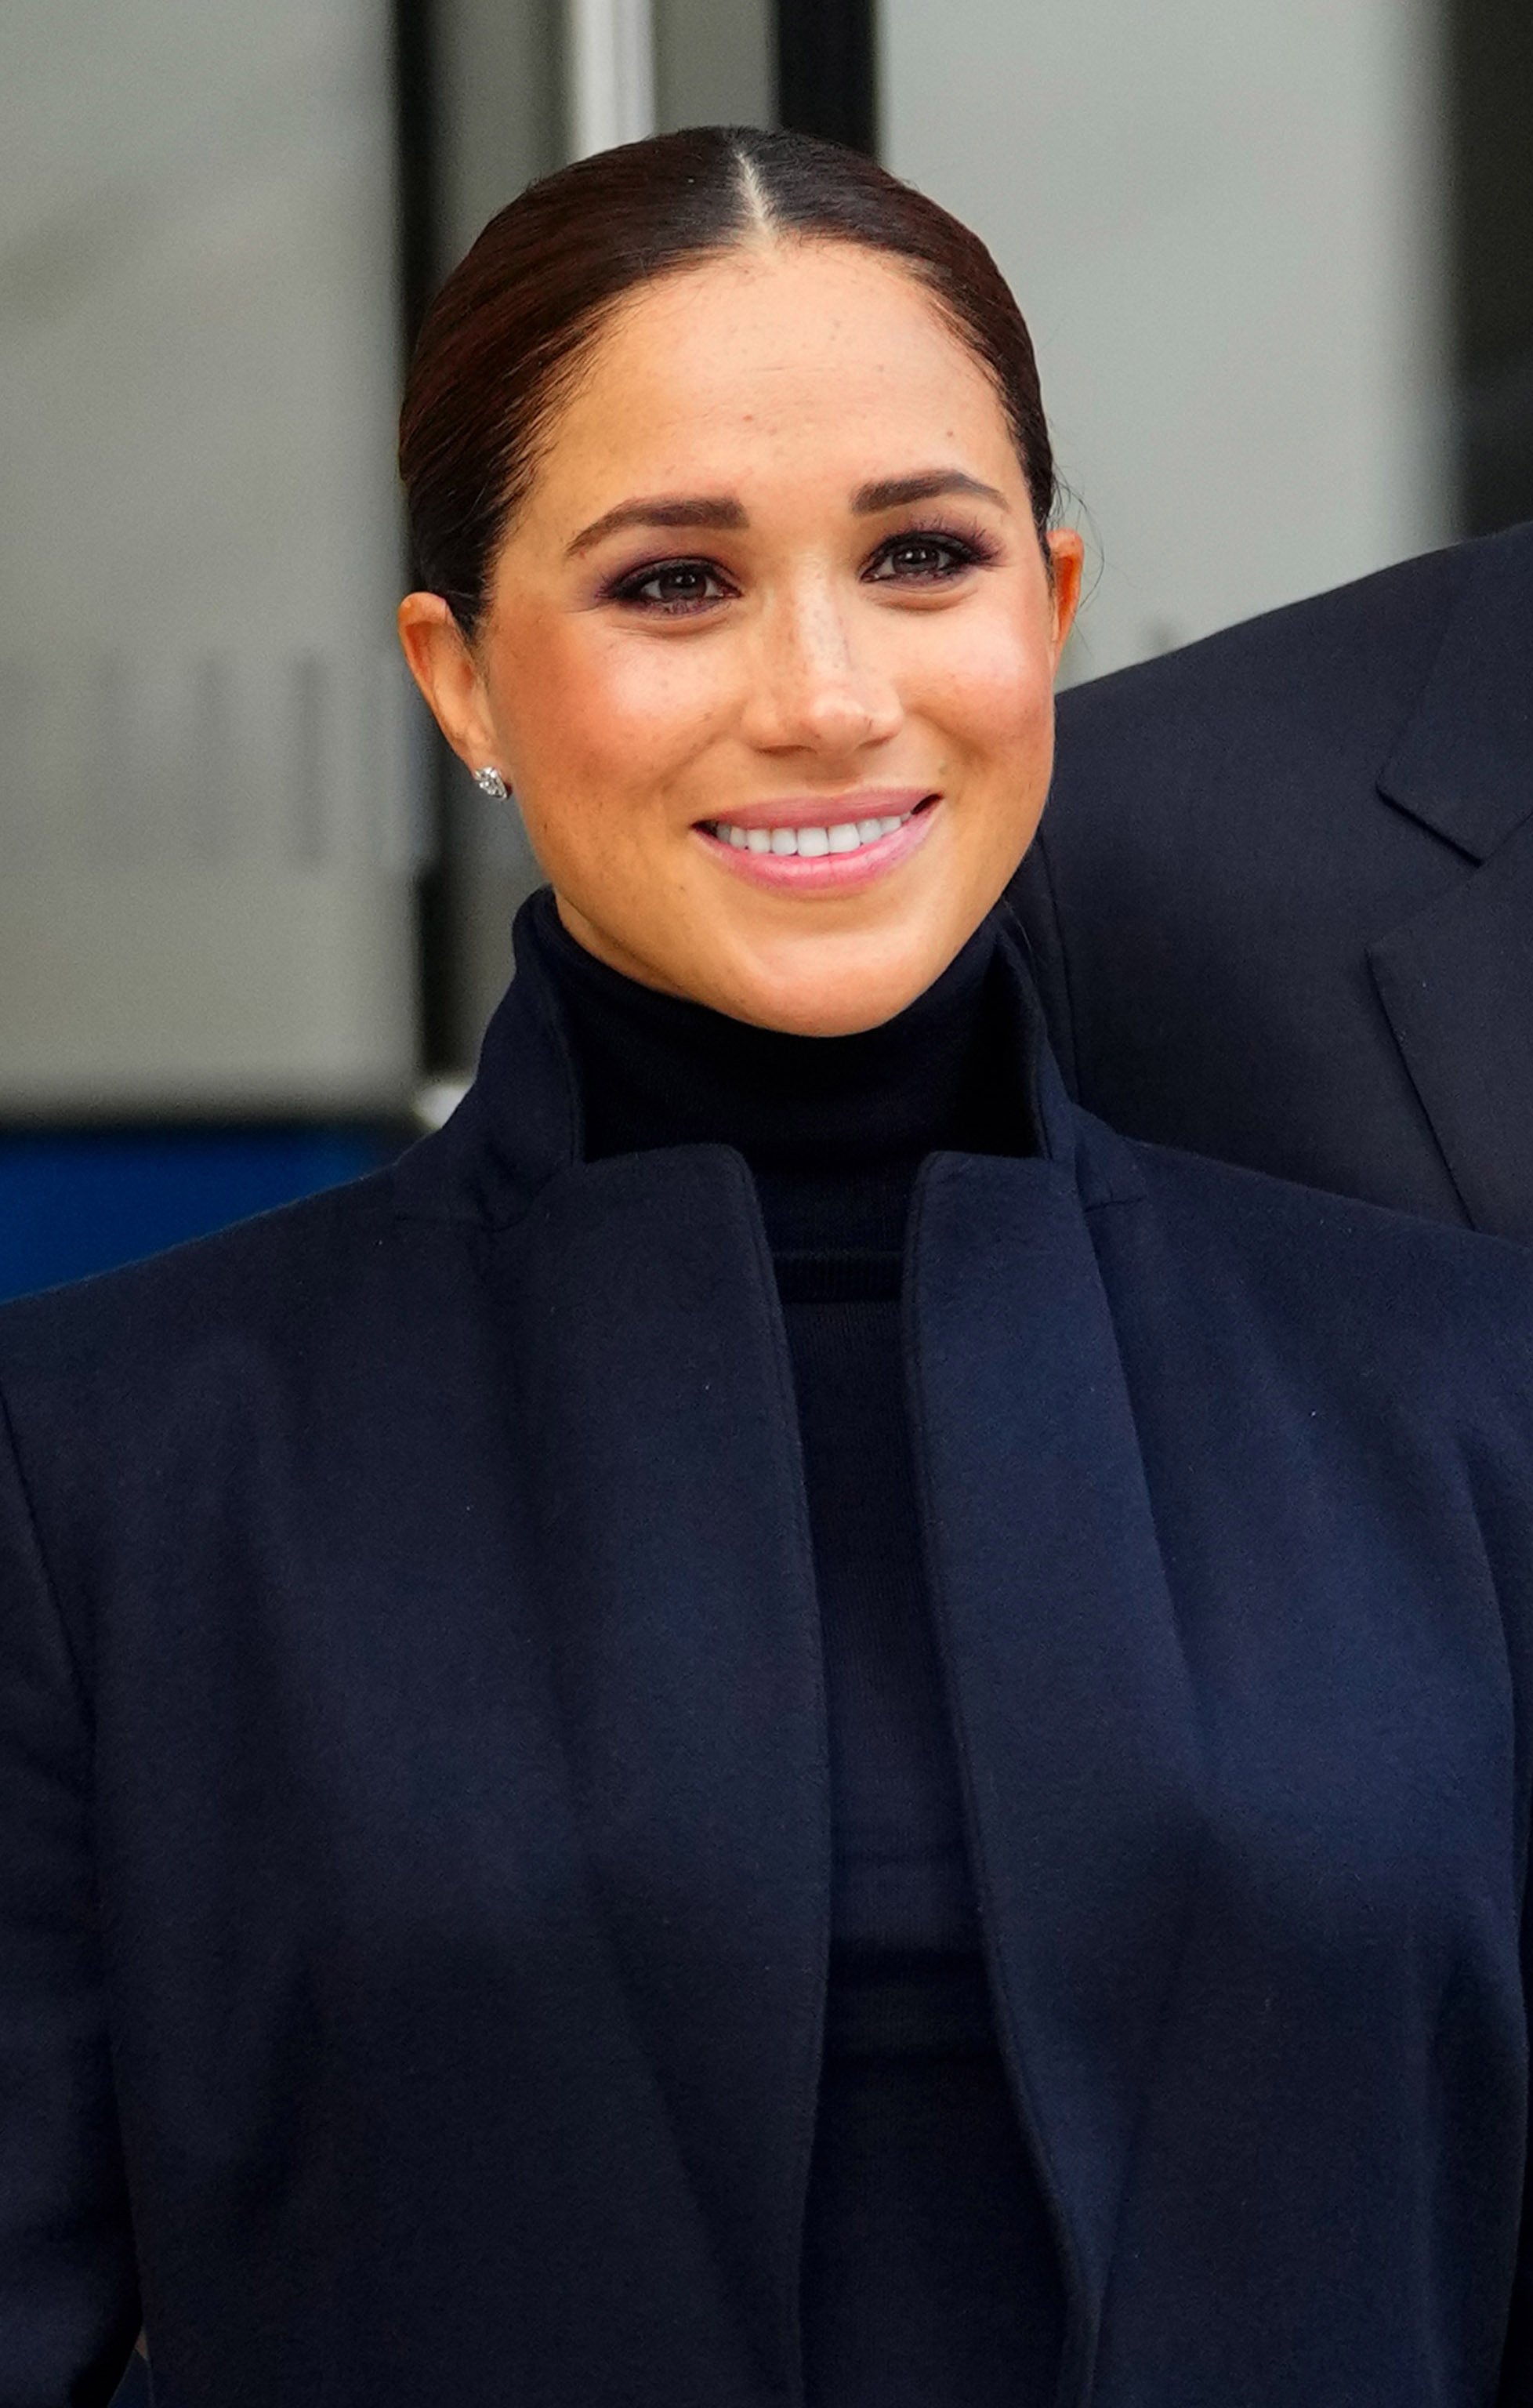 Meghan Markle, Duchess of Sussex, visits 1 World Trade Center on September 23, 2021, in New York City. | Source: Getty Images